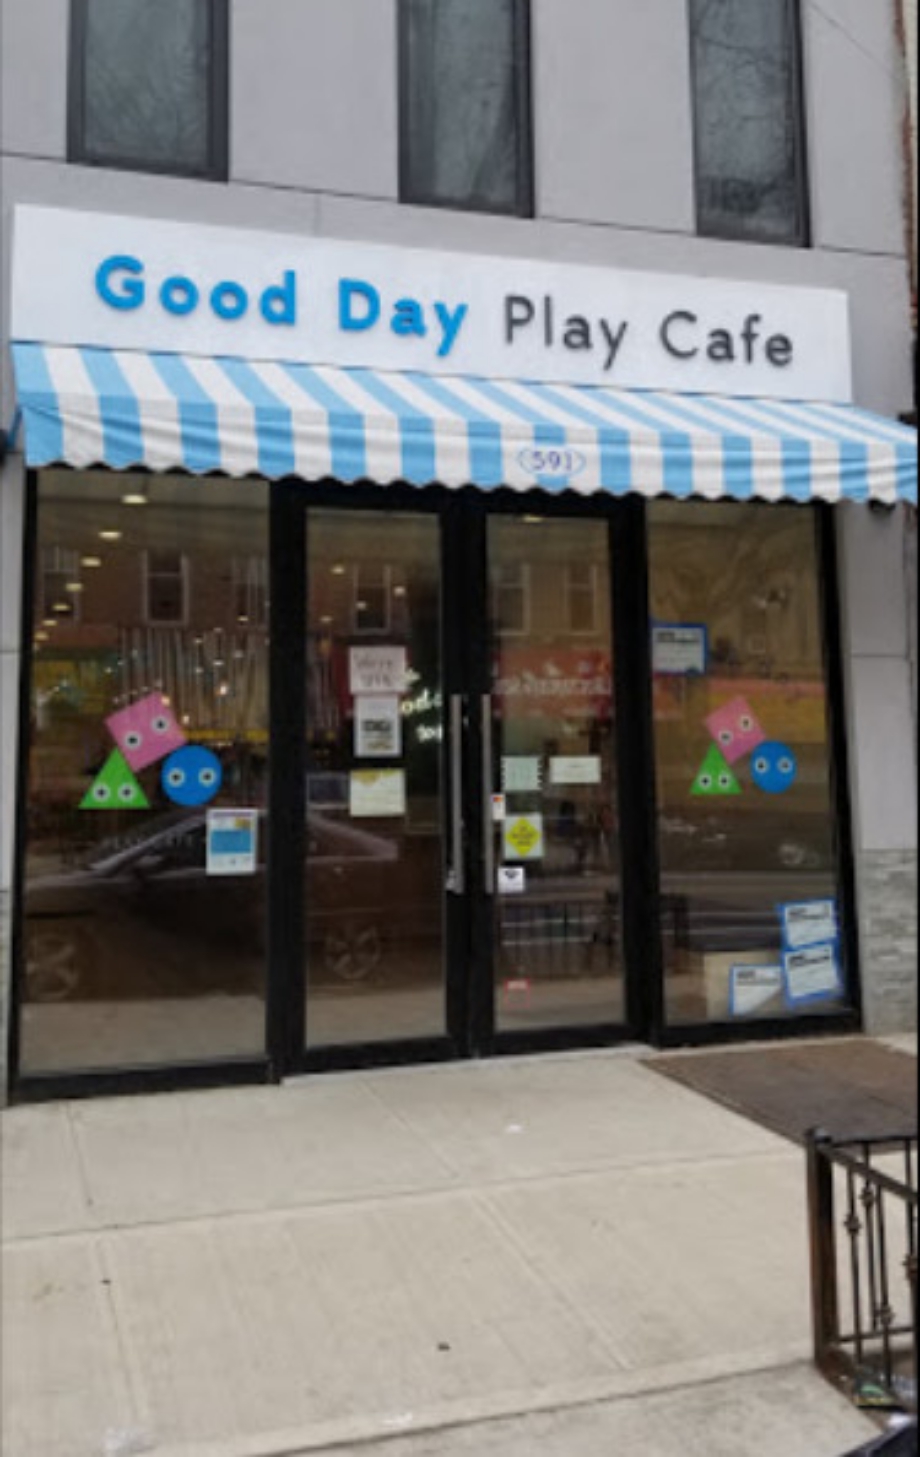 Good Day Play Cafe